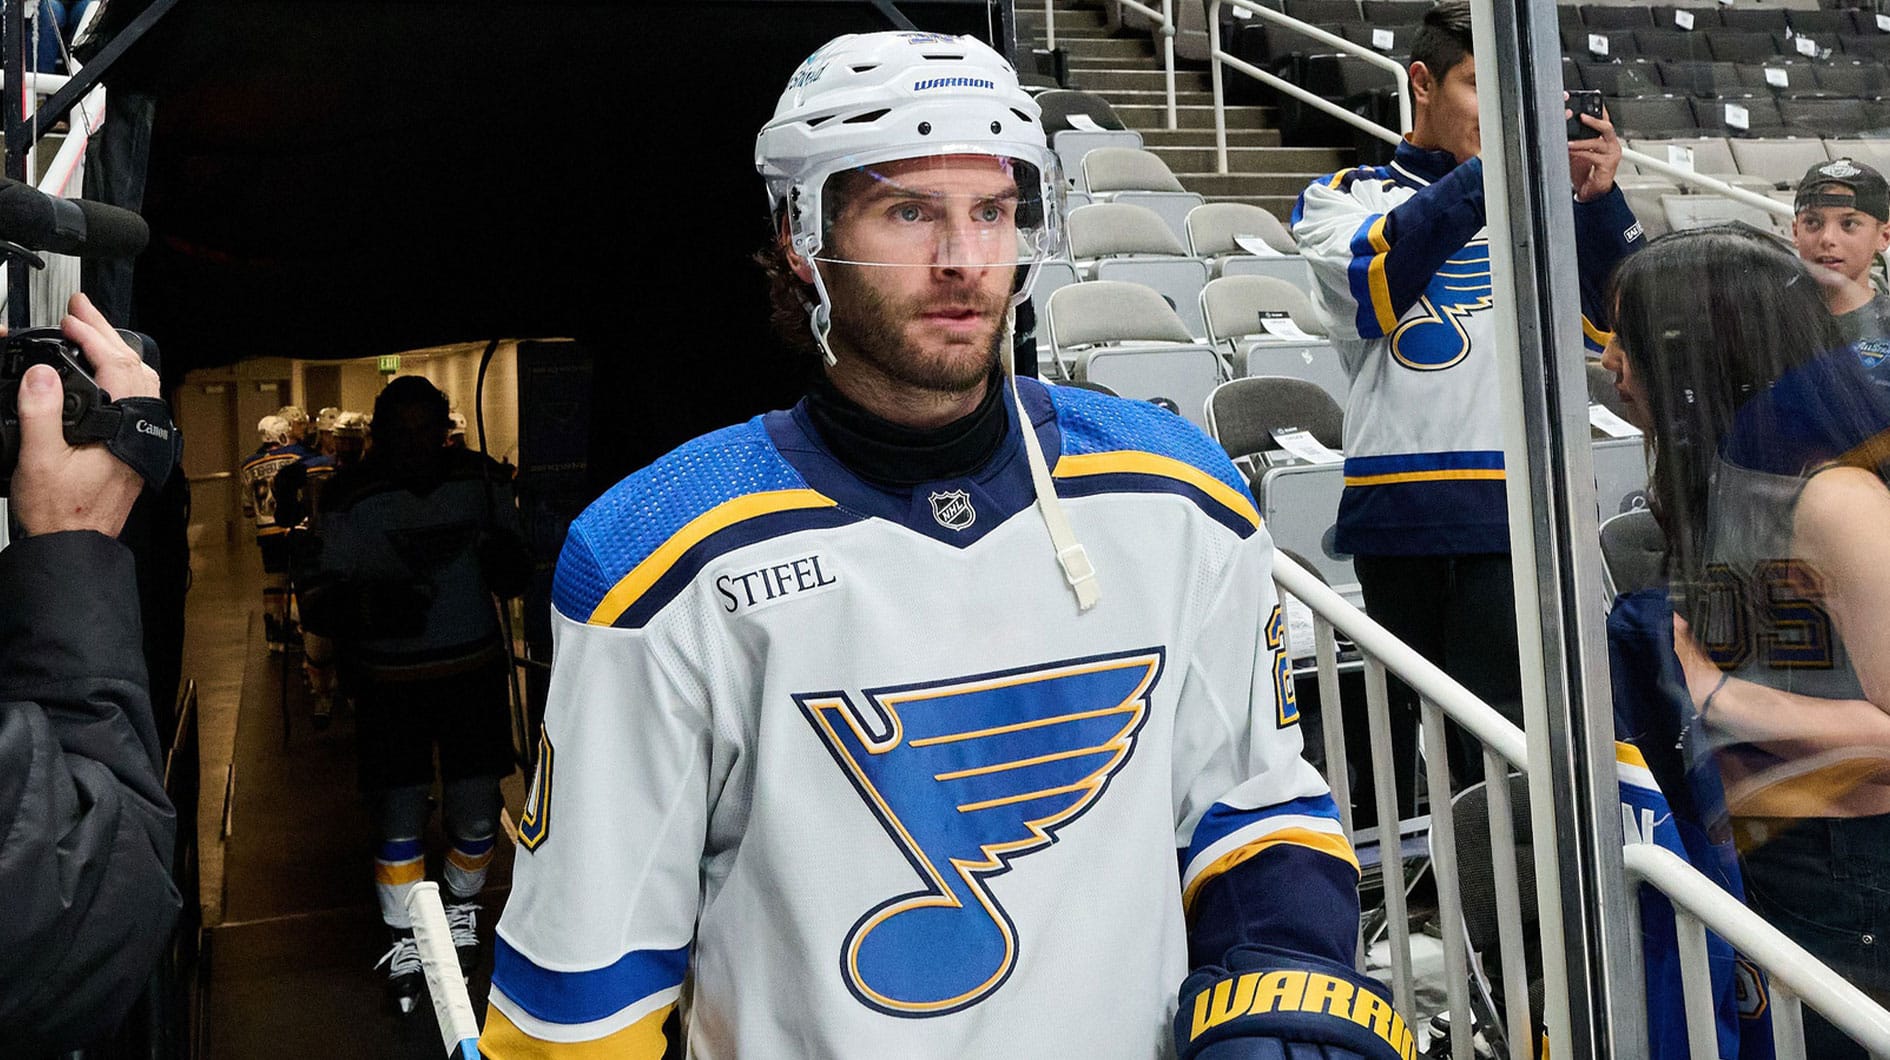 St. Louis Blues left wing Brandon Saad (20) walks to the ice for warmups before the game between the San Jose Sharks and the St. Louis Blues at SAP Center at San Jose.